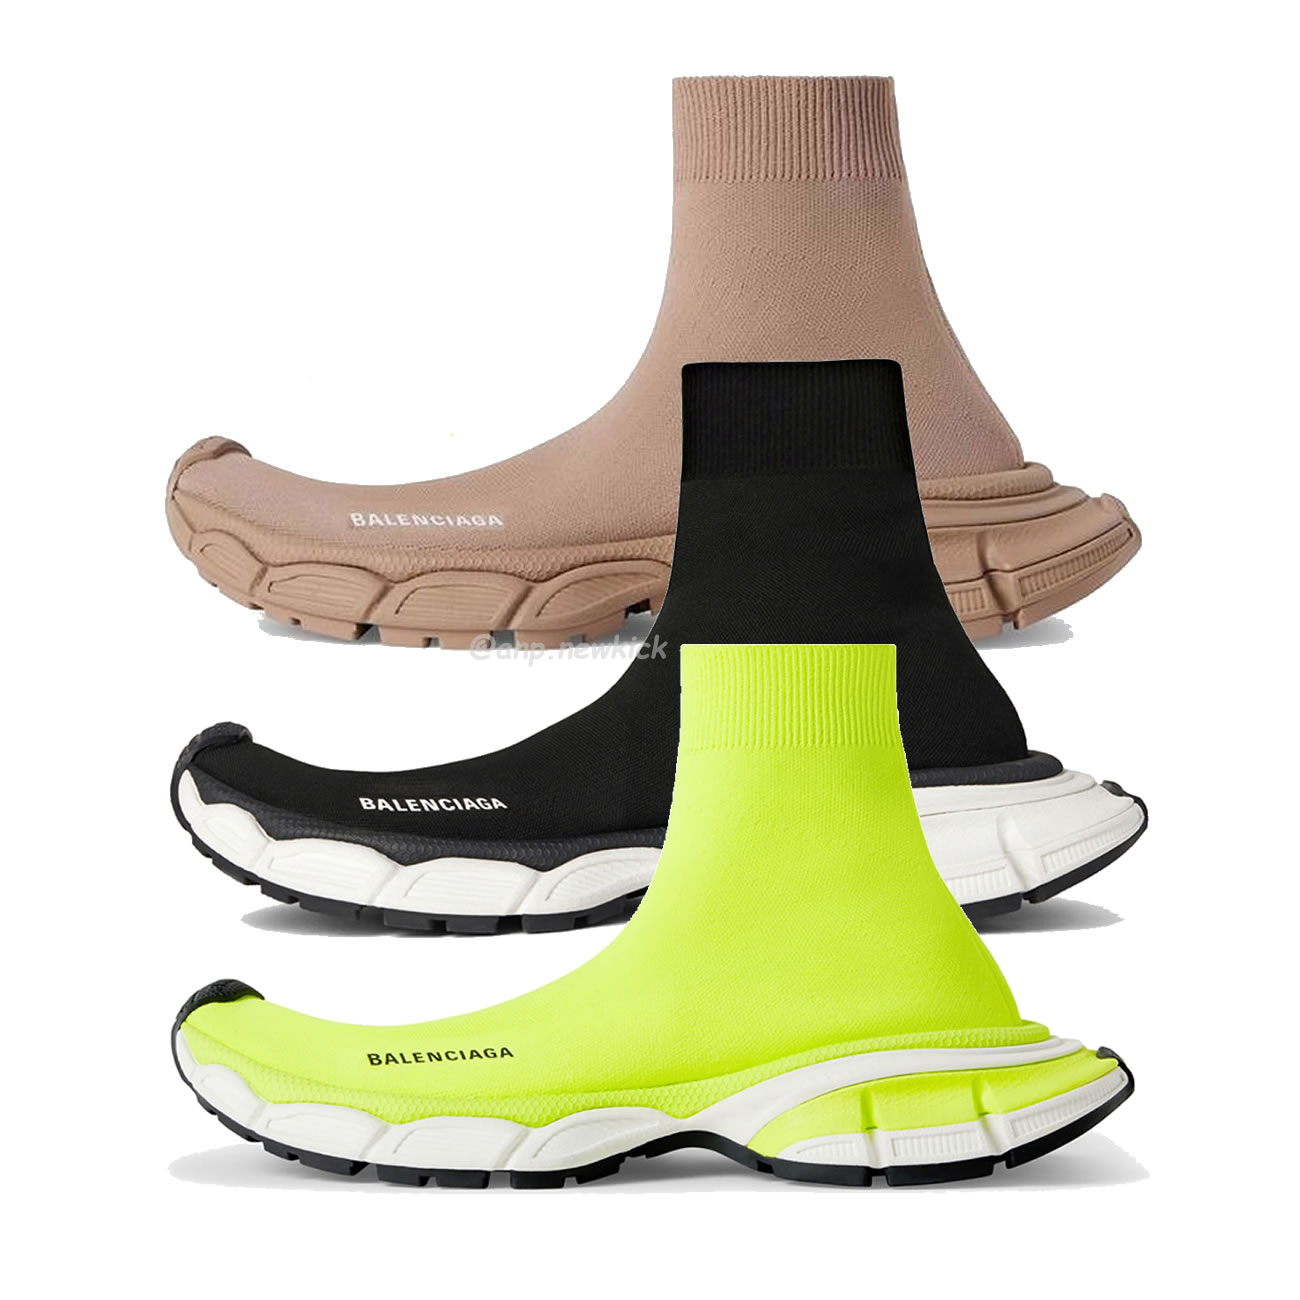 Balenciaga 3xl Sock Recycled Knit Sneakers Black White Fluo Yellow Beige (1) - newkick.org